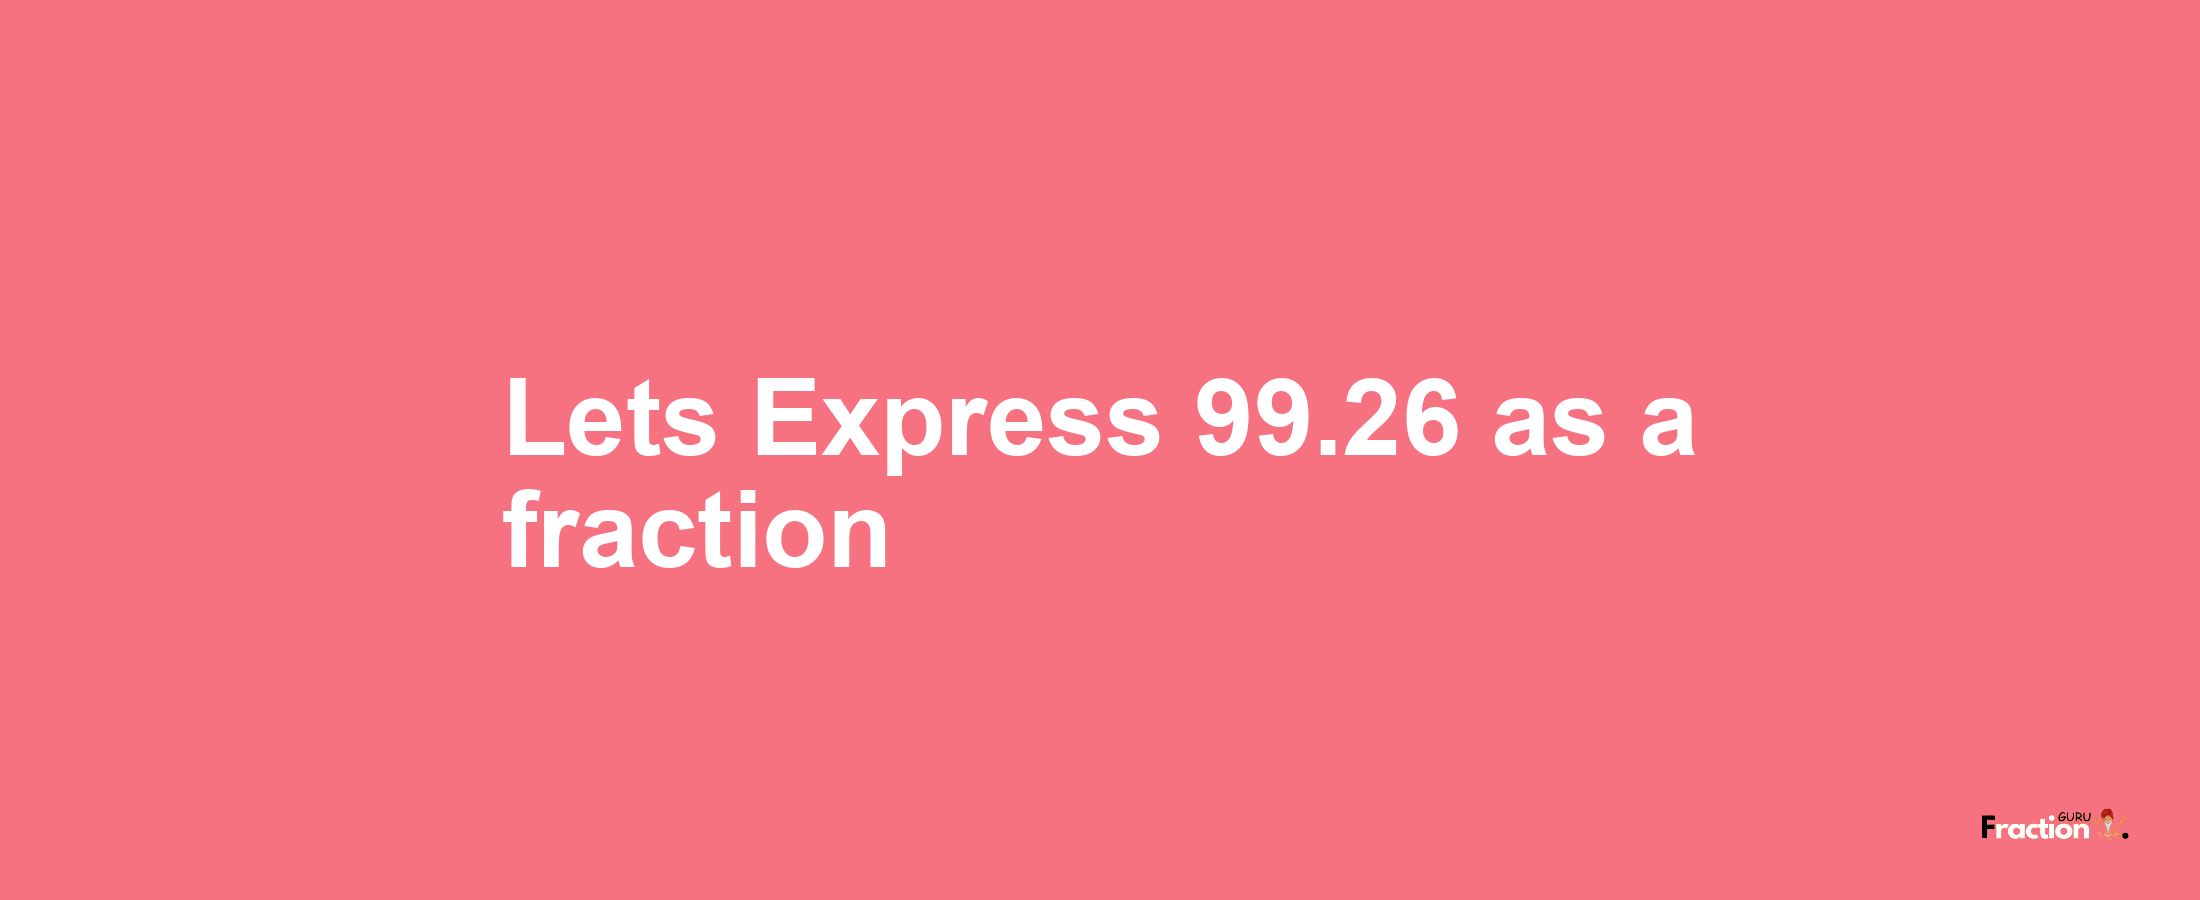 Lets Express 99.26 as afraction